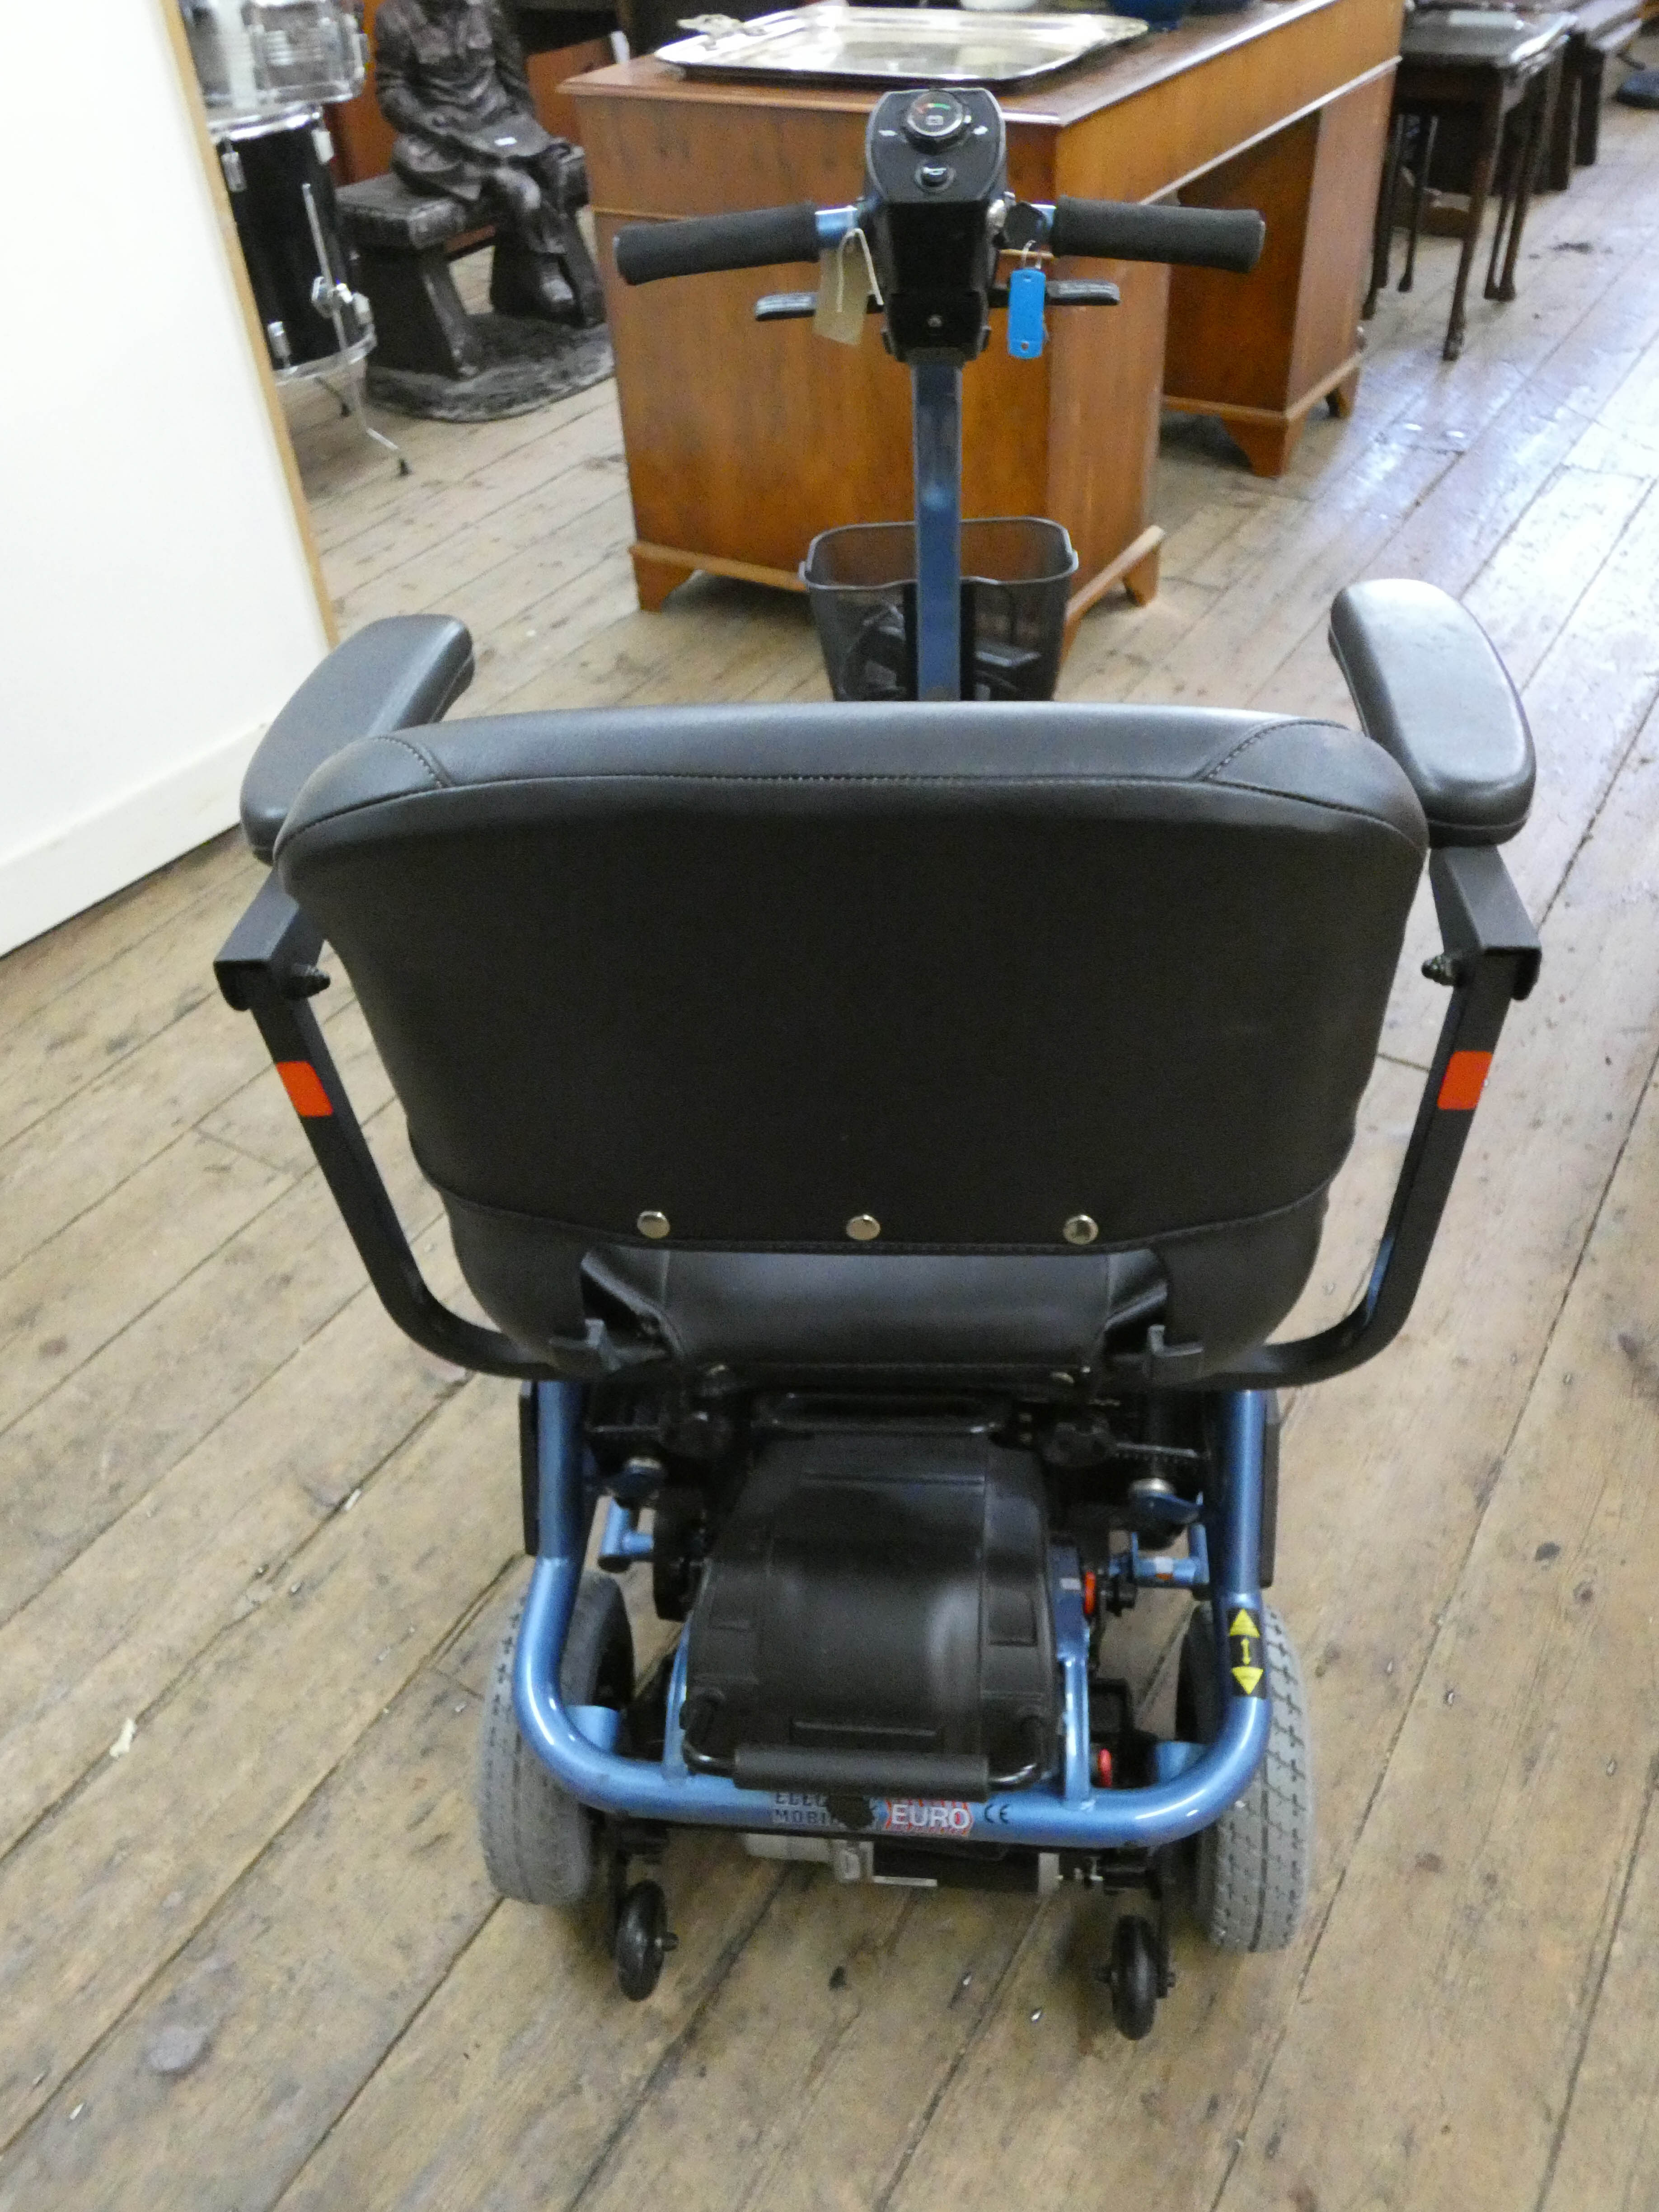 A Litewal 3 Mobility scooter in good clean condition - Image 3 of 4